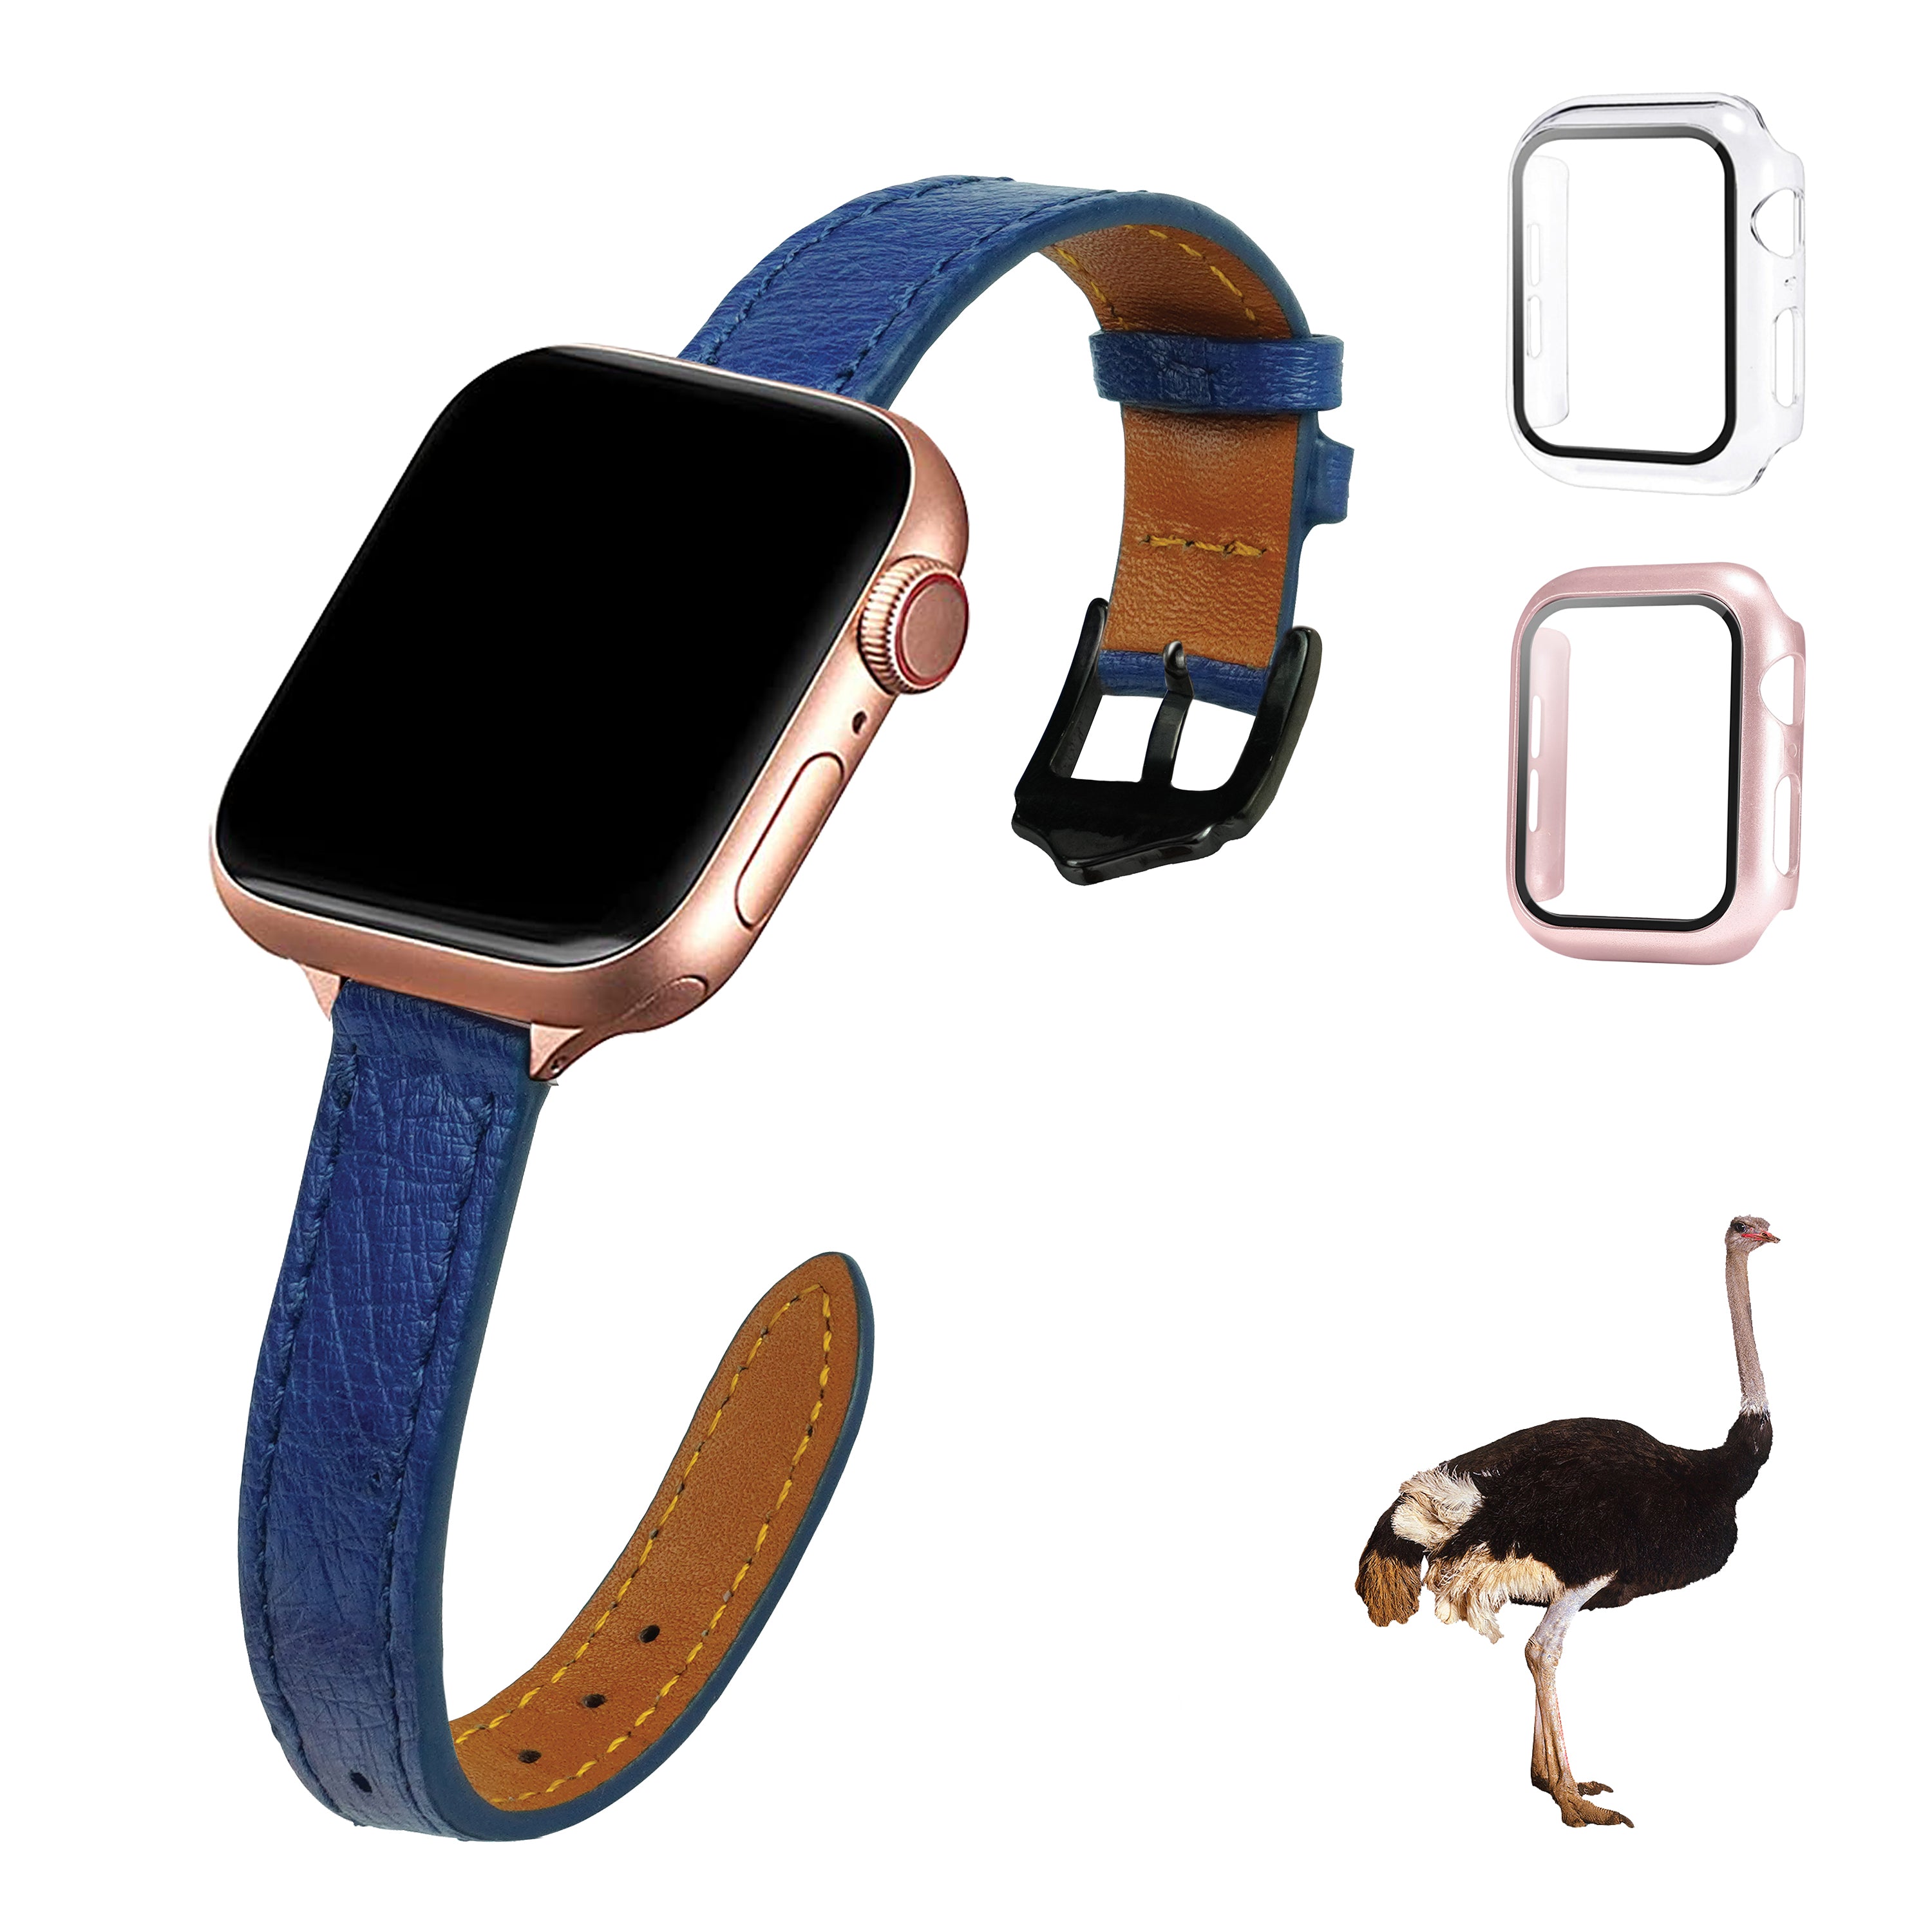 Blue Flat Ostrich Leather Band Compatible Apple Watch Iwatch 38mm Screen Protector Case Black Adapter Replacement Strap For Smartwatch Series 1 2 3 Leather Handmade AW-184B-W-38MM